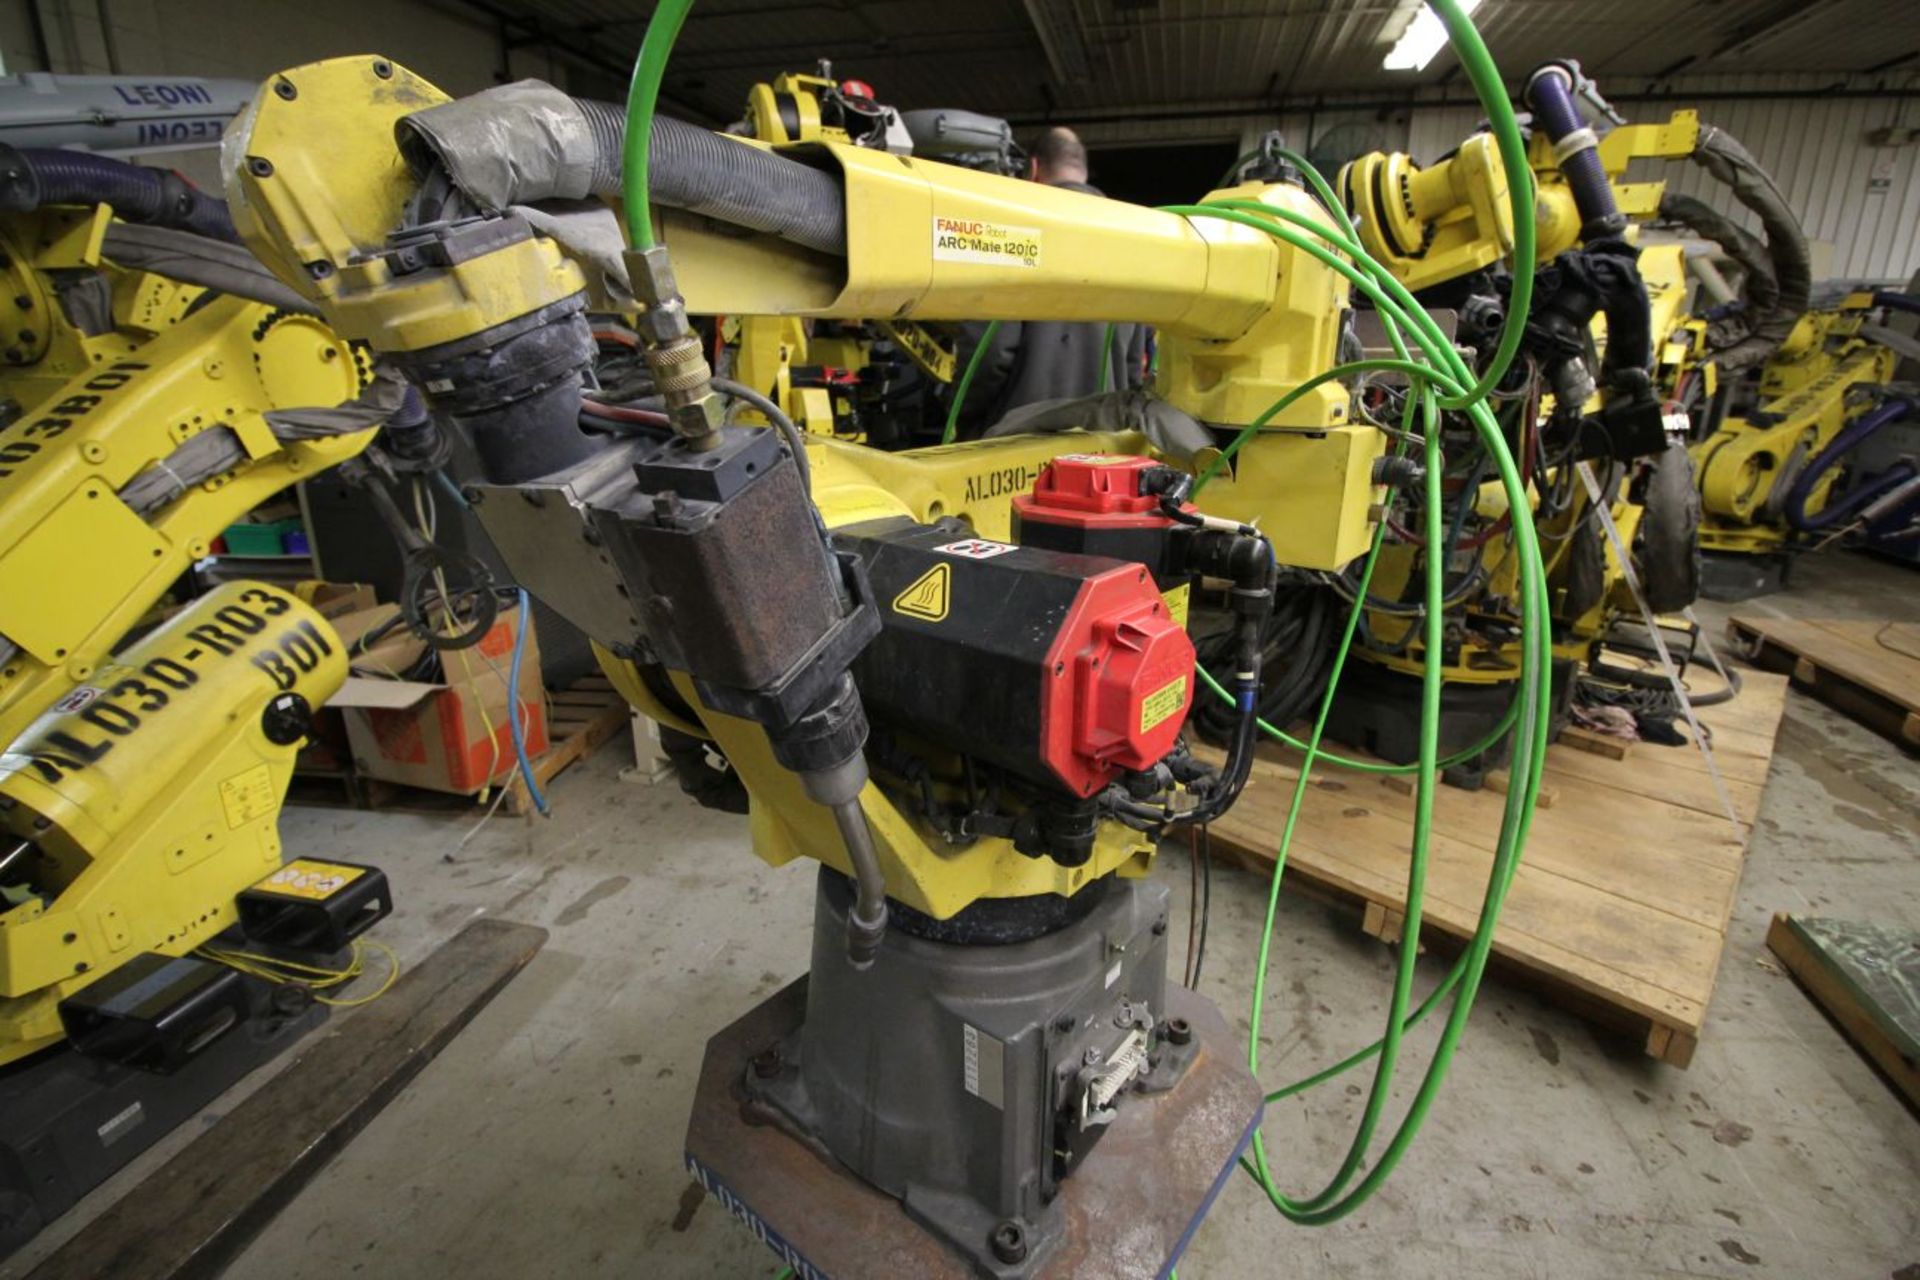 FANUC ROBOT ARCMATE 120iC/10L WITH R30iA CONTROL, TEACH PENDANT, CABLES, LINCOLN I400 POWER SUPPLY - Image 3 of 10